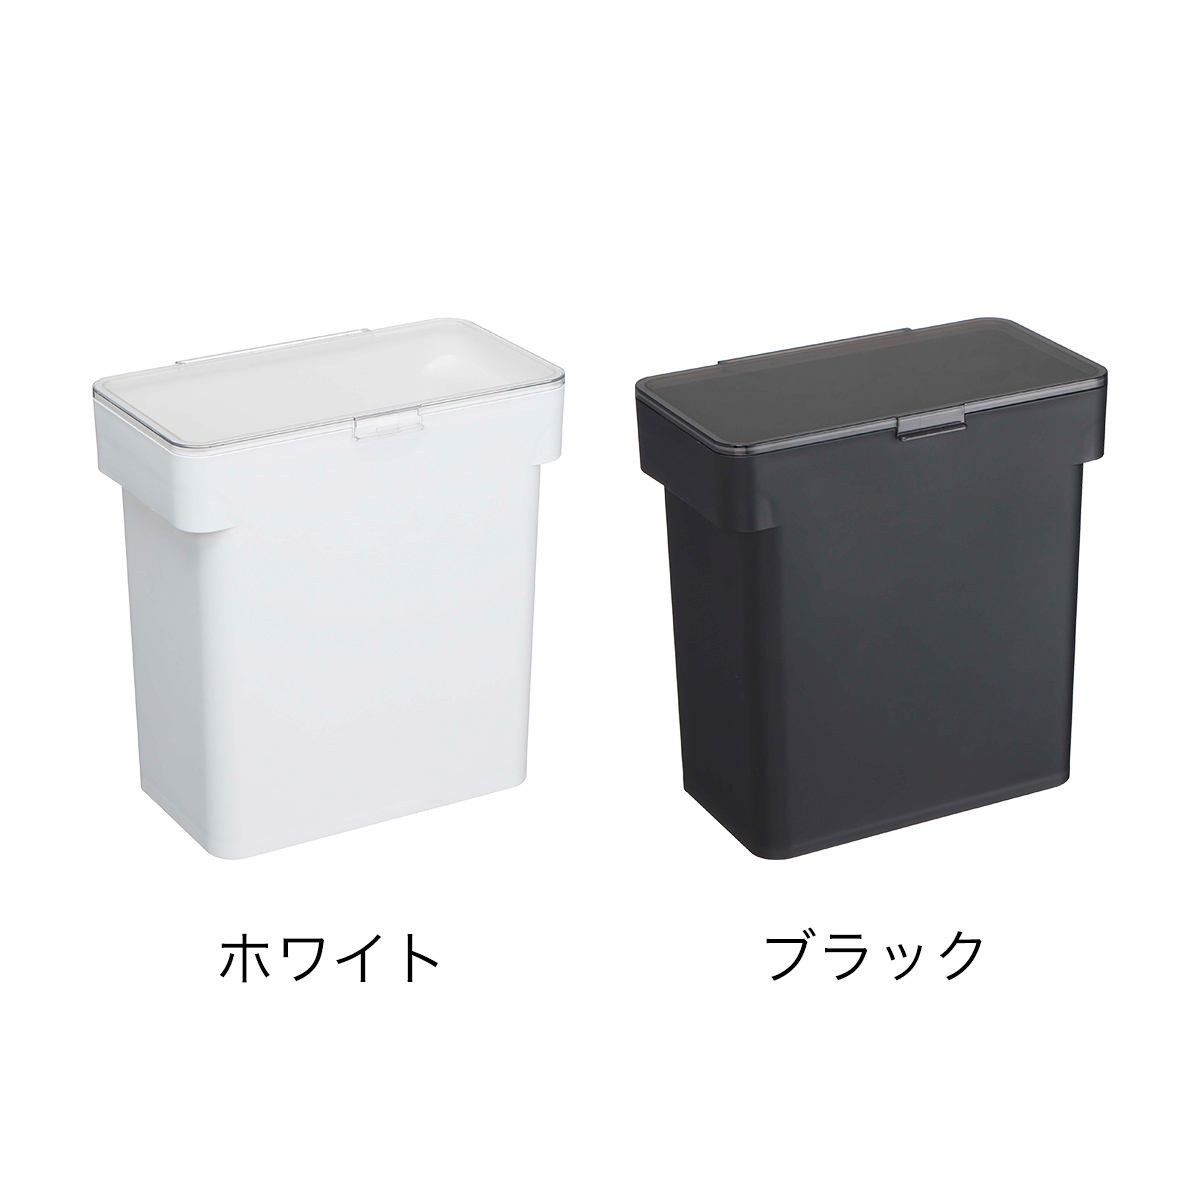 [ air-tigh sack .. pet food stocker 3kg measure cup attaching tower ] Yamazaki real industry tower pet food stocker air-tigh storage dog food cat food 5613 5614